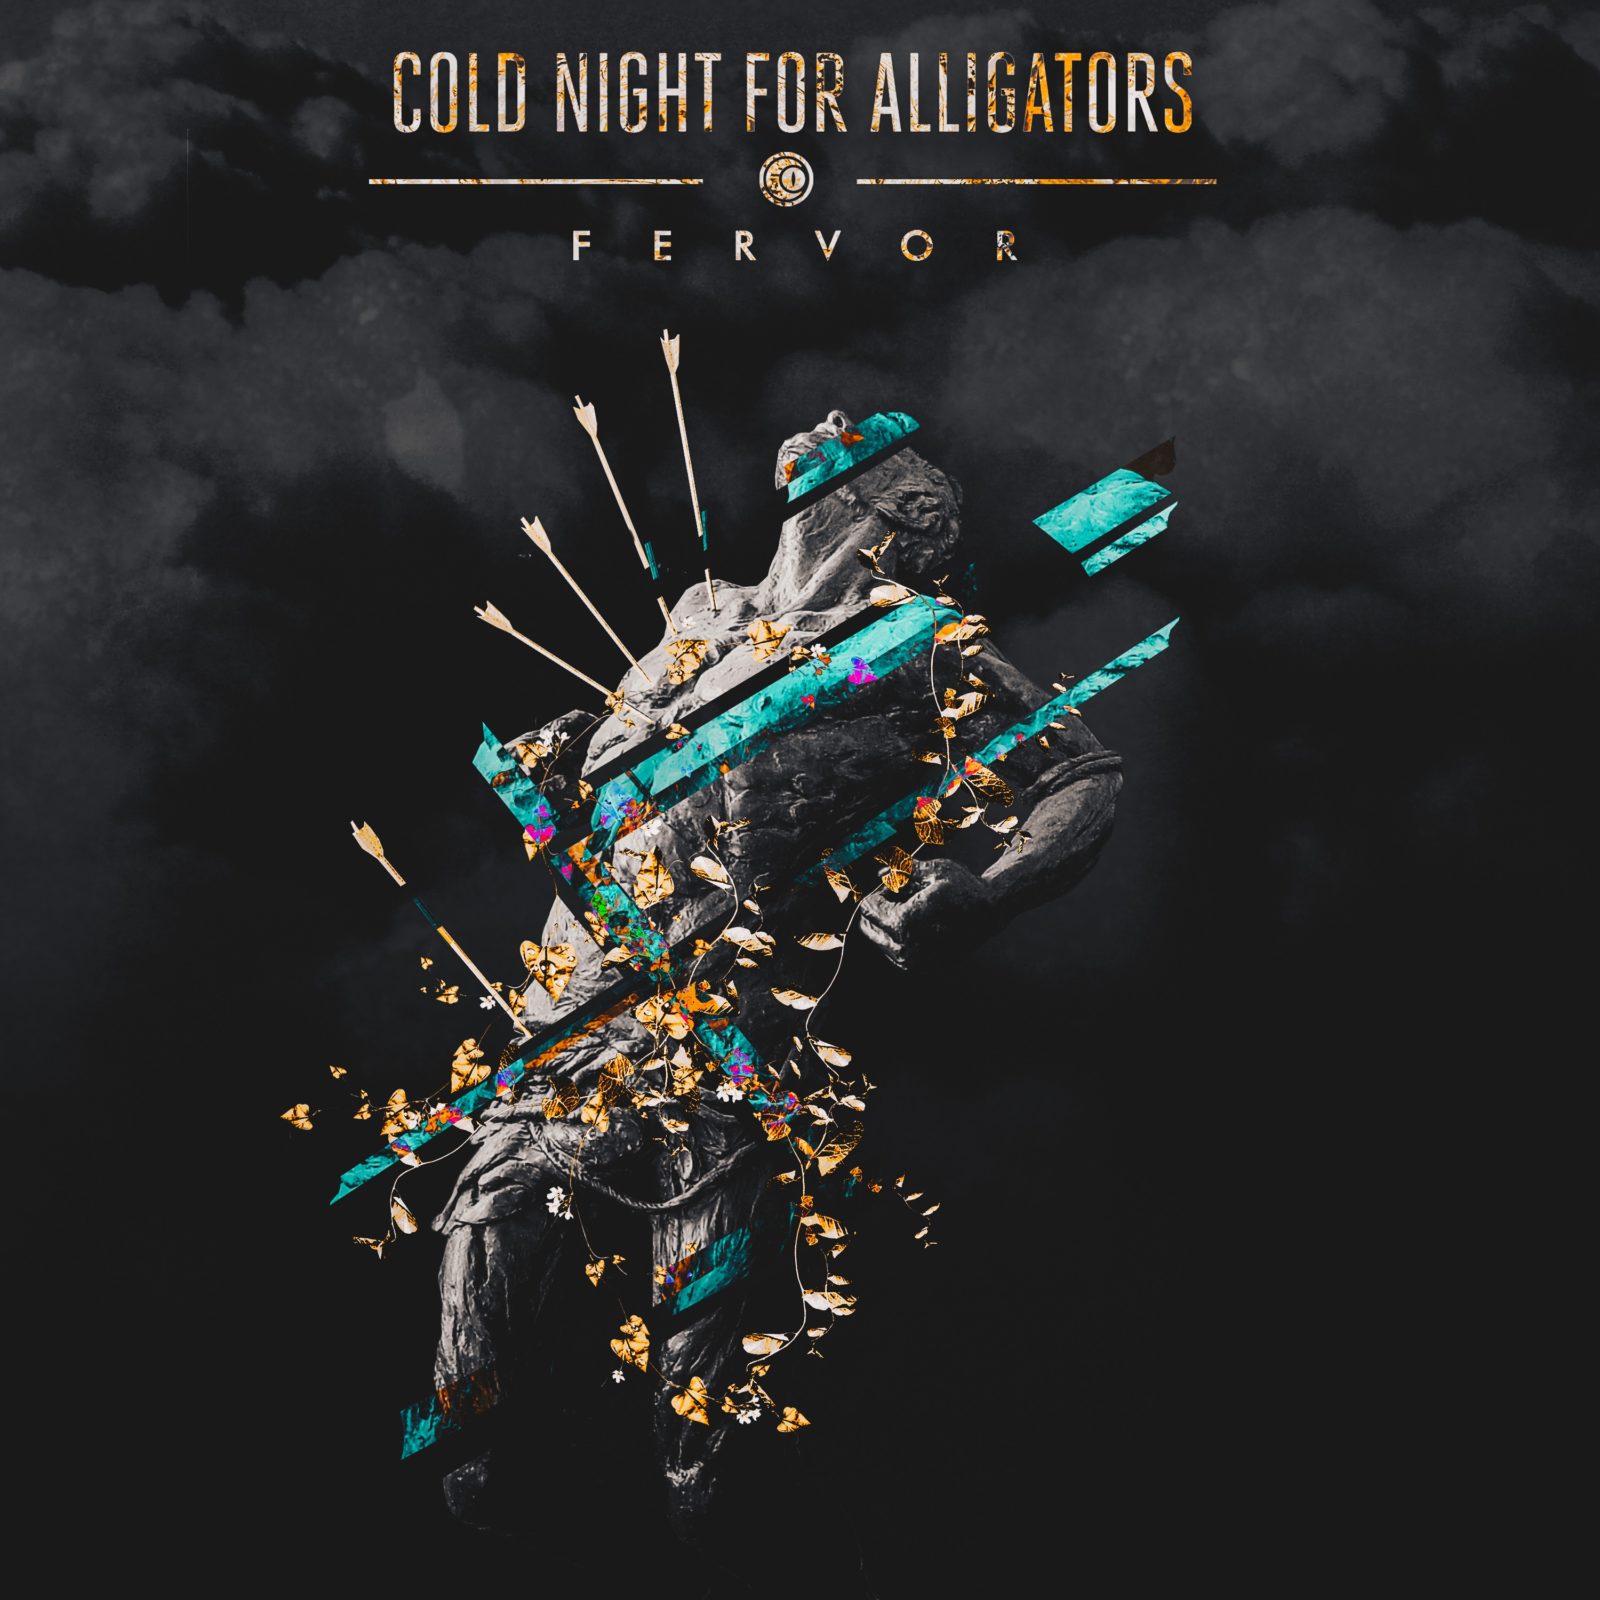 Cold nights 1. Cold Night for Alligators. Cold Night for Alligators Band. Cold Night for Alligators the Hindsight Notes. This Cold Night группа.